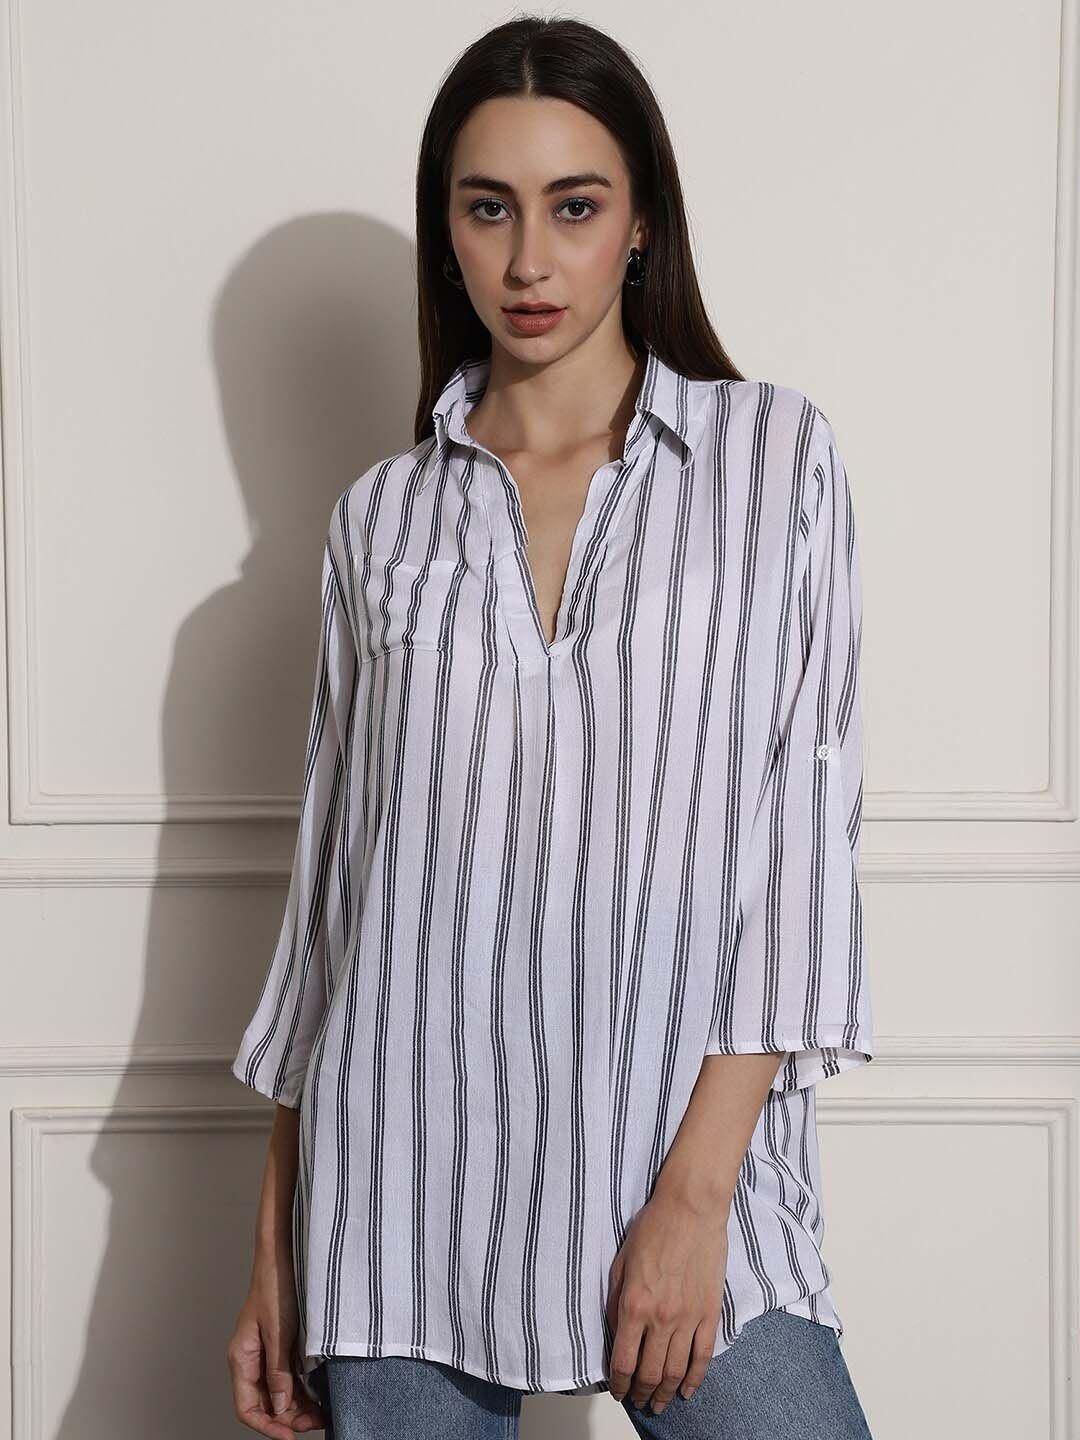 nobarr striped shirt style top